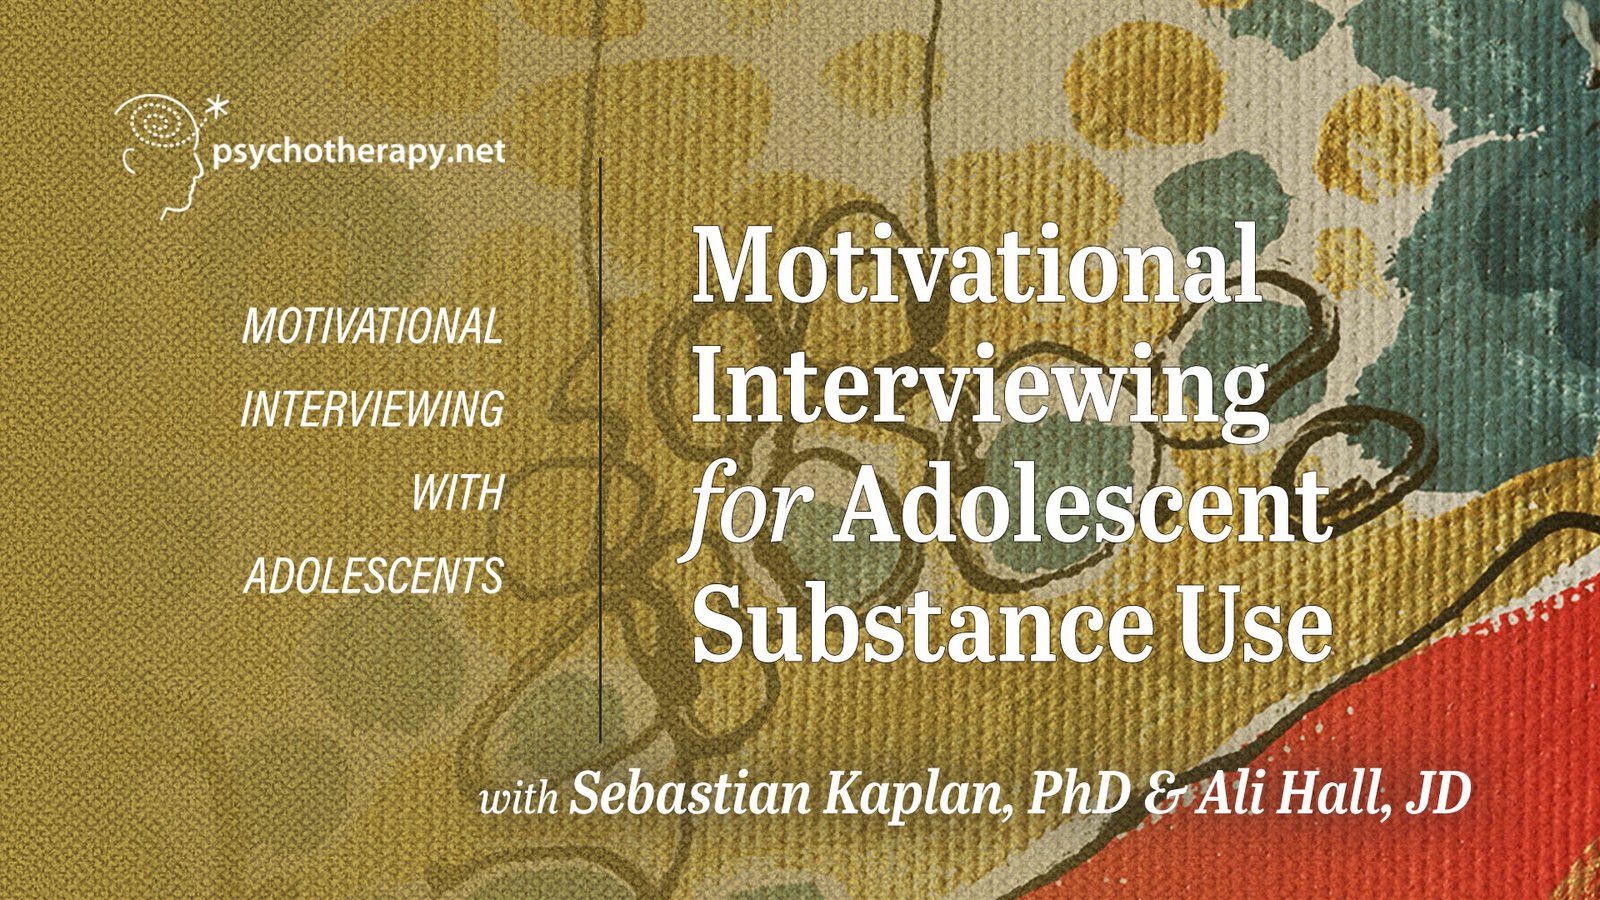 Motivational Interviewing for Adolescent Substance Use